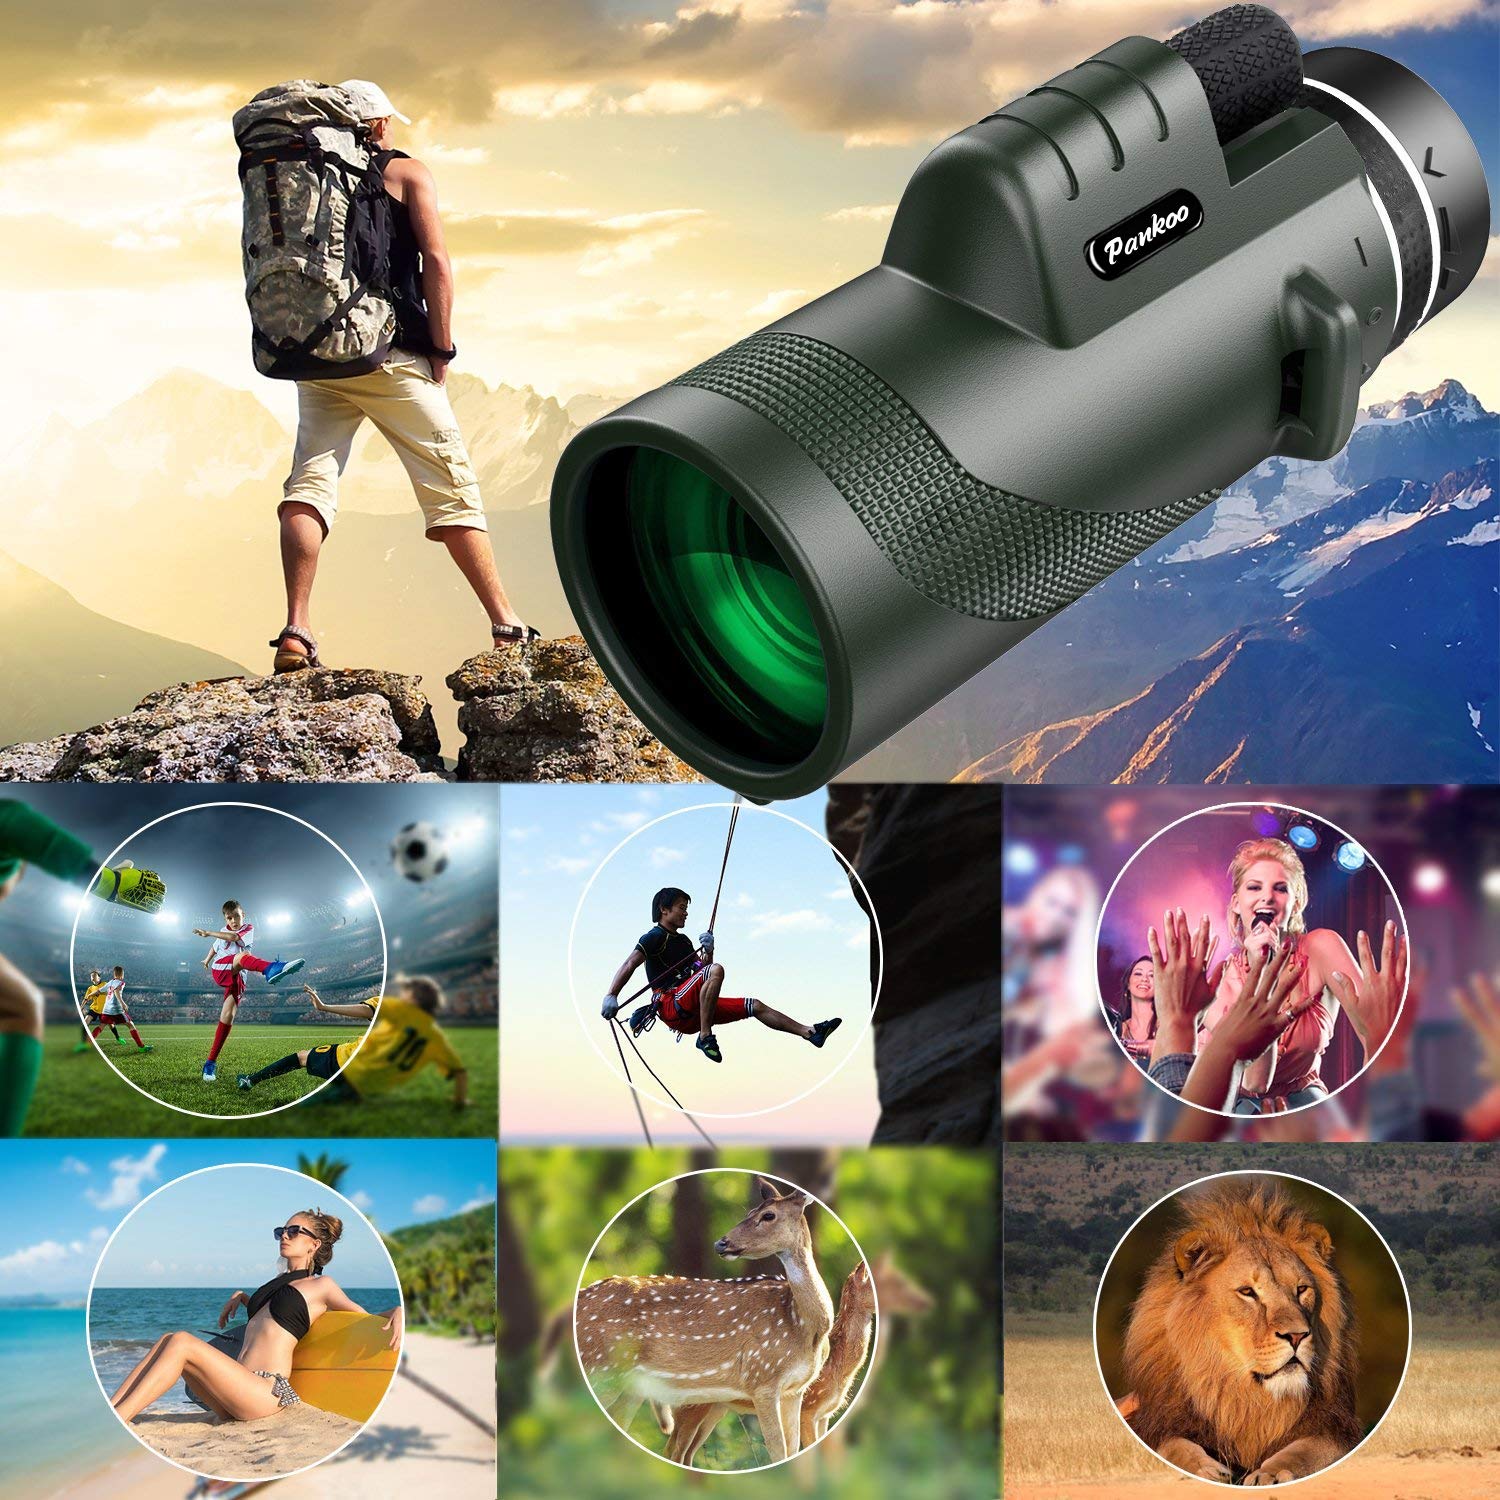 Pankoo 40X60 Monocular High Power Monocular Scope for Bird Watching Traveling Concert Sports Game with Phone Adapter Tripod